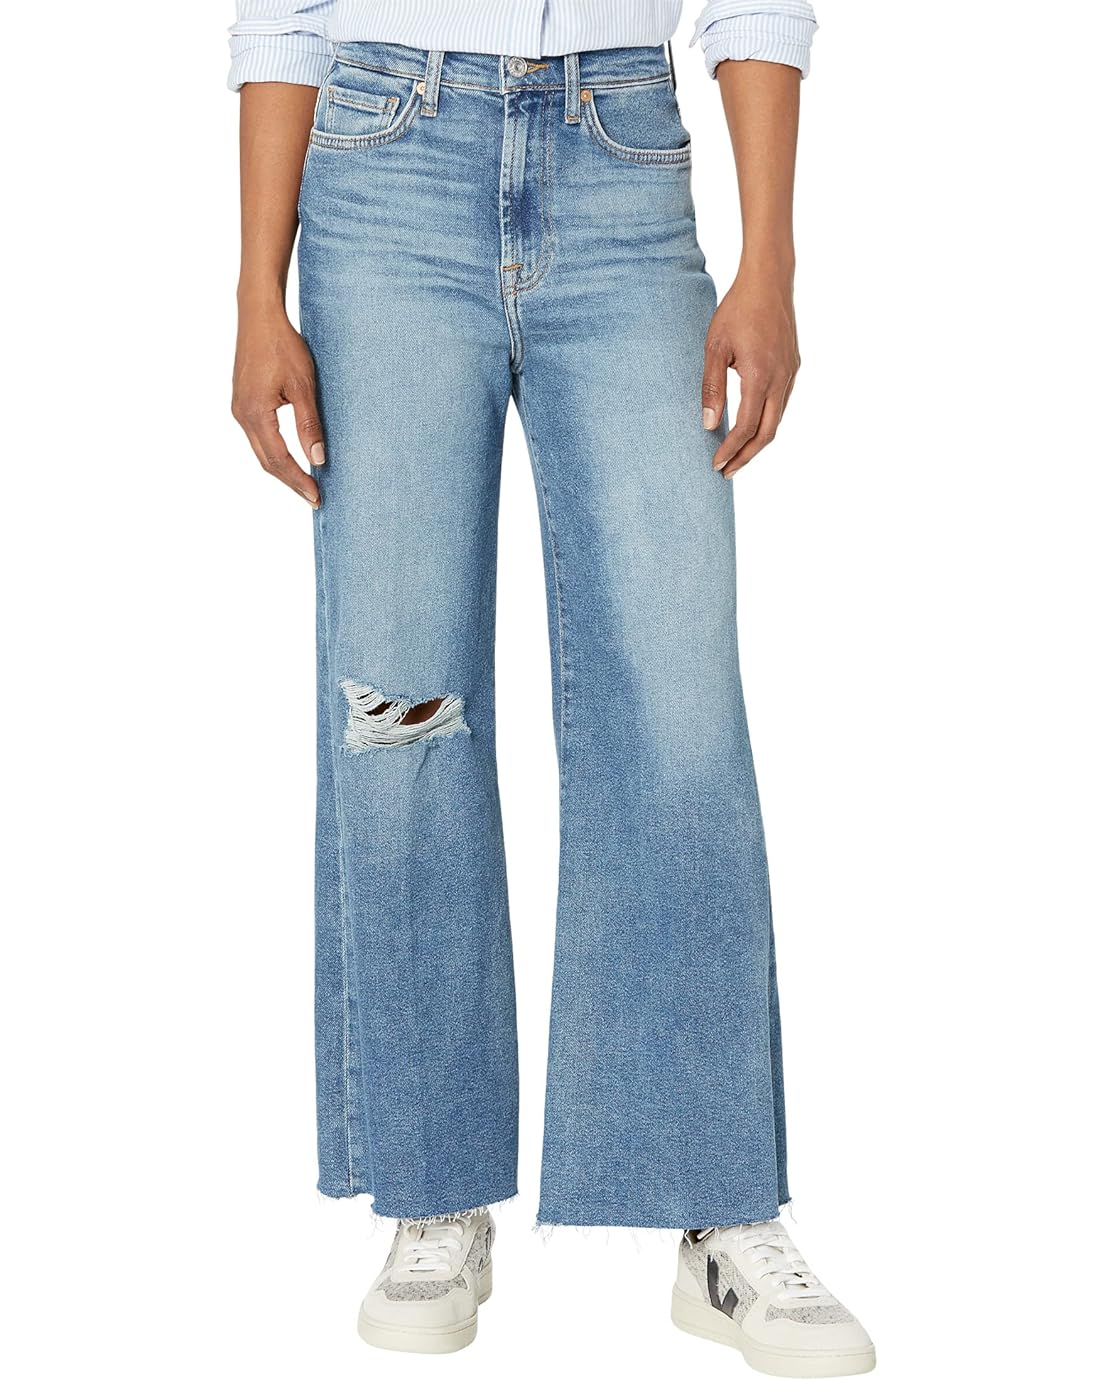 7 For All Mankind Ultra High-Rise Cropped Jo in Luxe Vintage Lyme